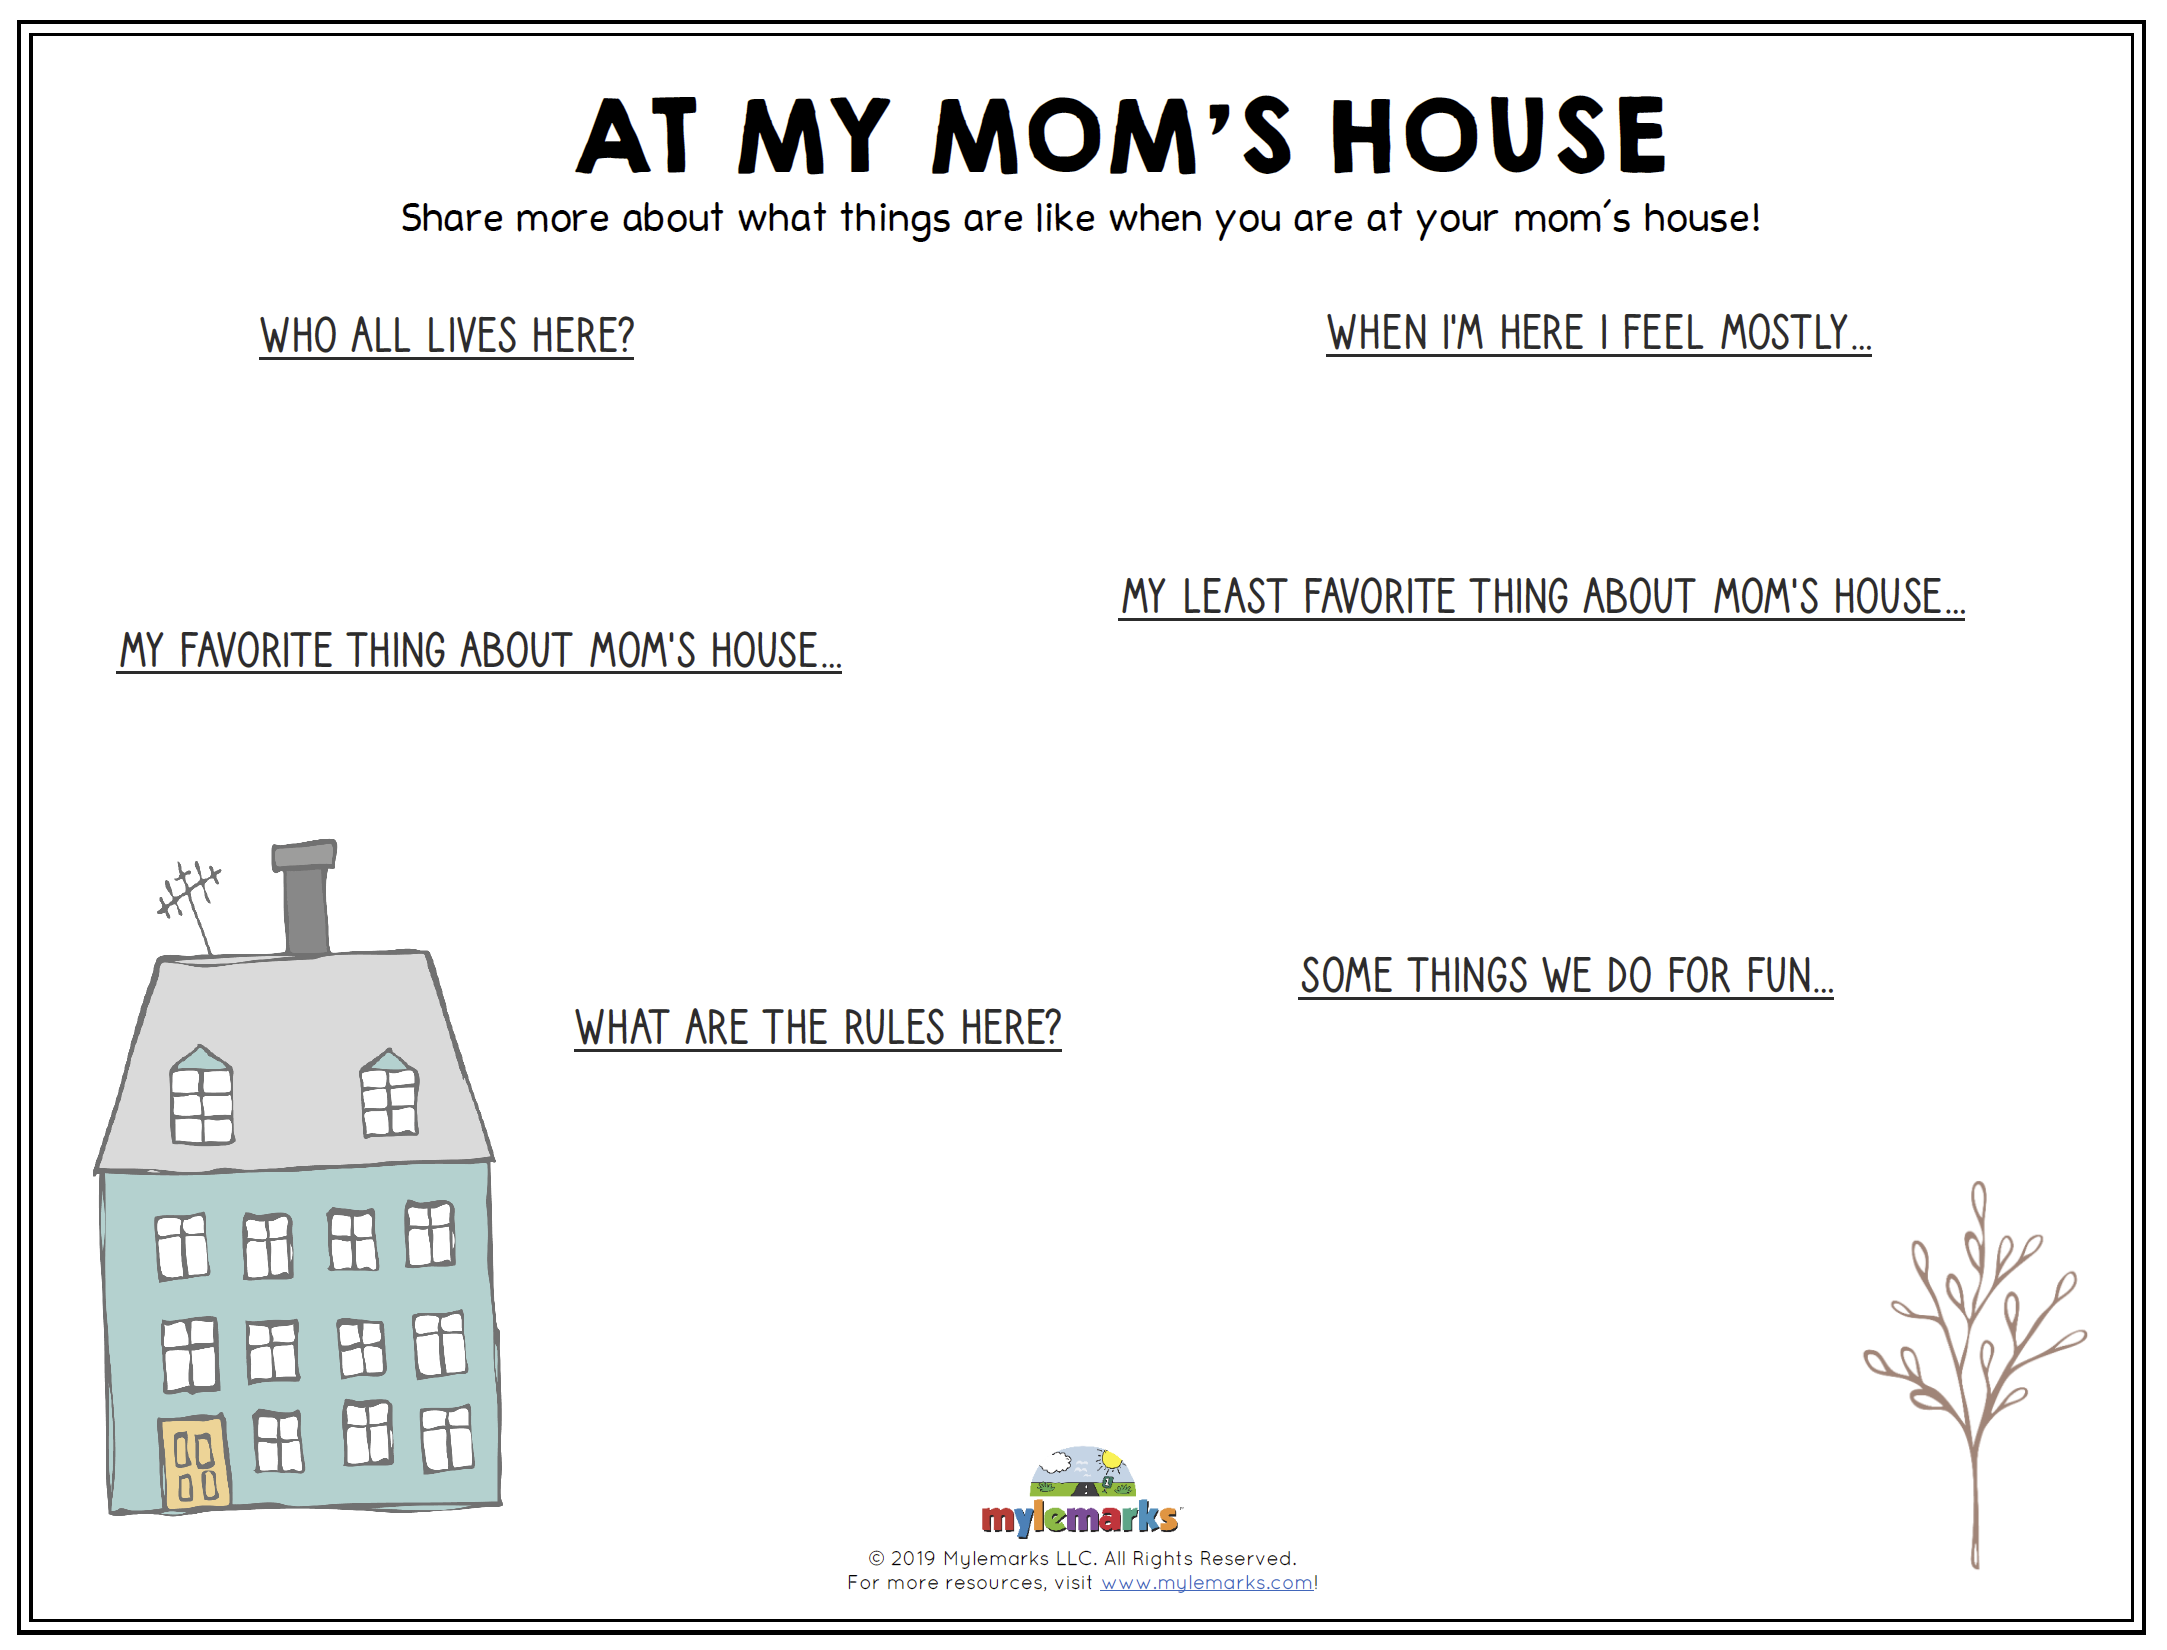 Things around the house worksheet